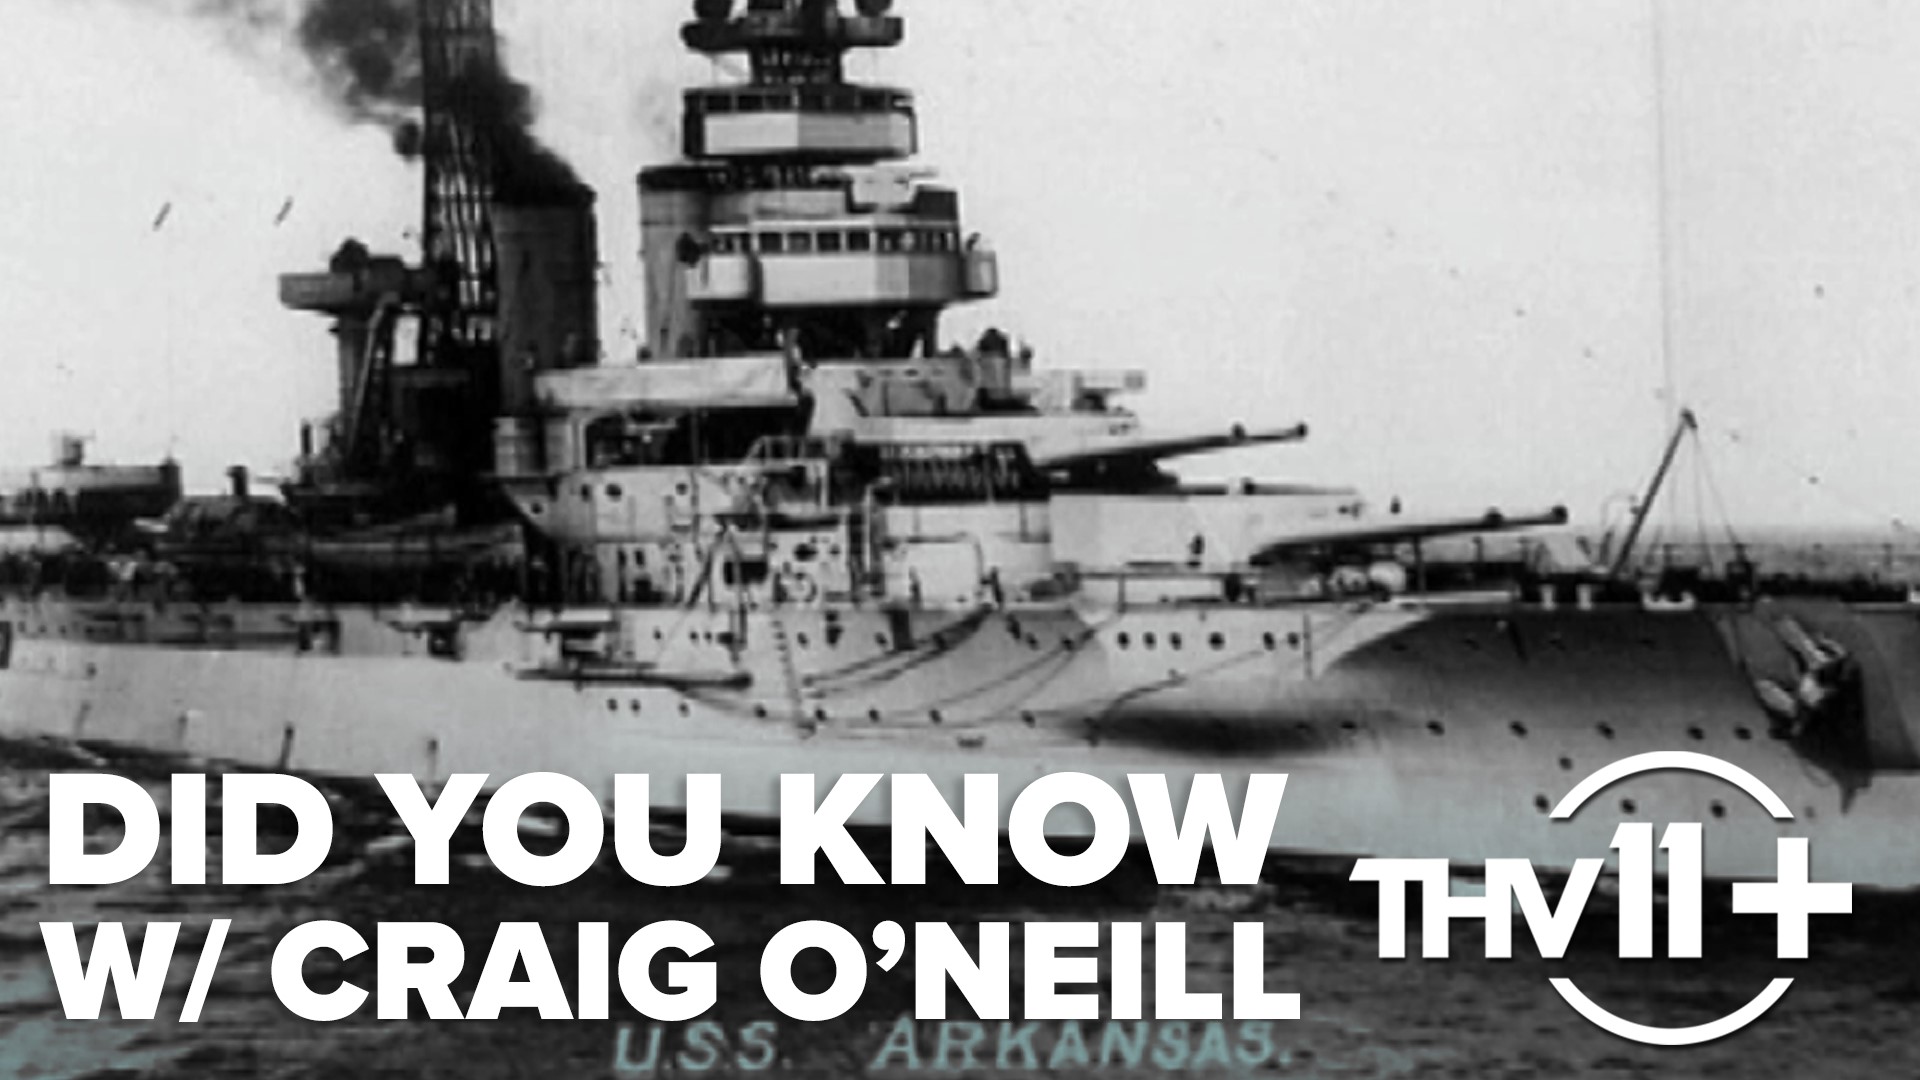 Craig O'Neill went through Arkansas history in 2013 including Orval Faubus, USS Arkansas during D-Day, and how the Old State House was built before we were a state.